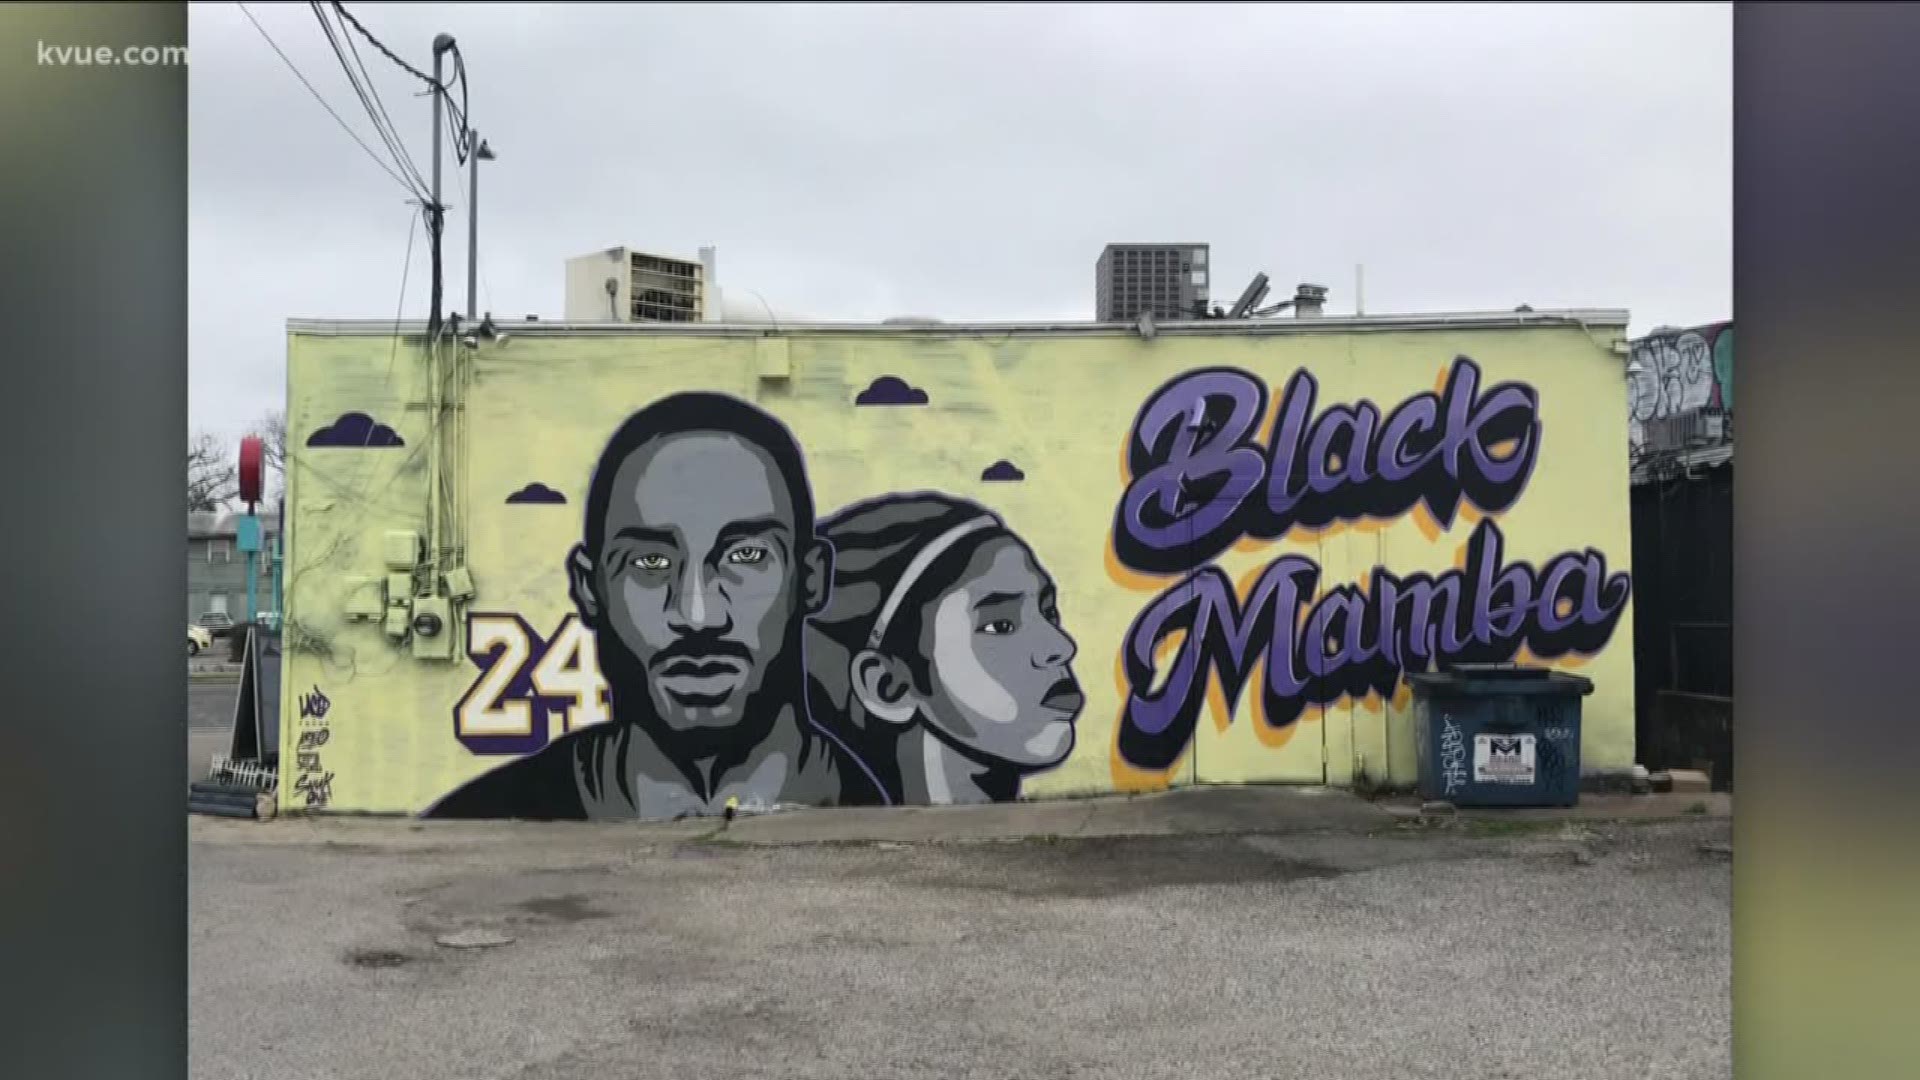 There's a new mural in Austin honoring Los Angeles Lakers superstar Kobe Bryant and his daughter.